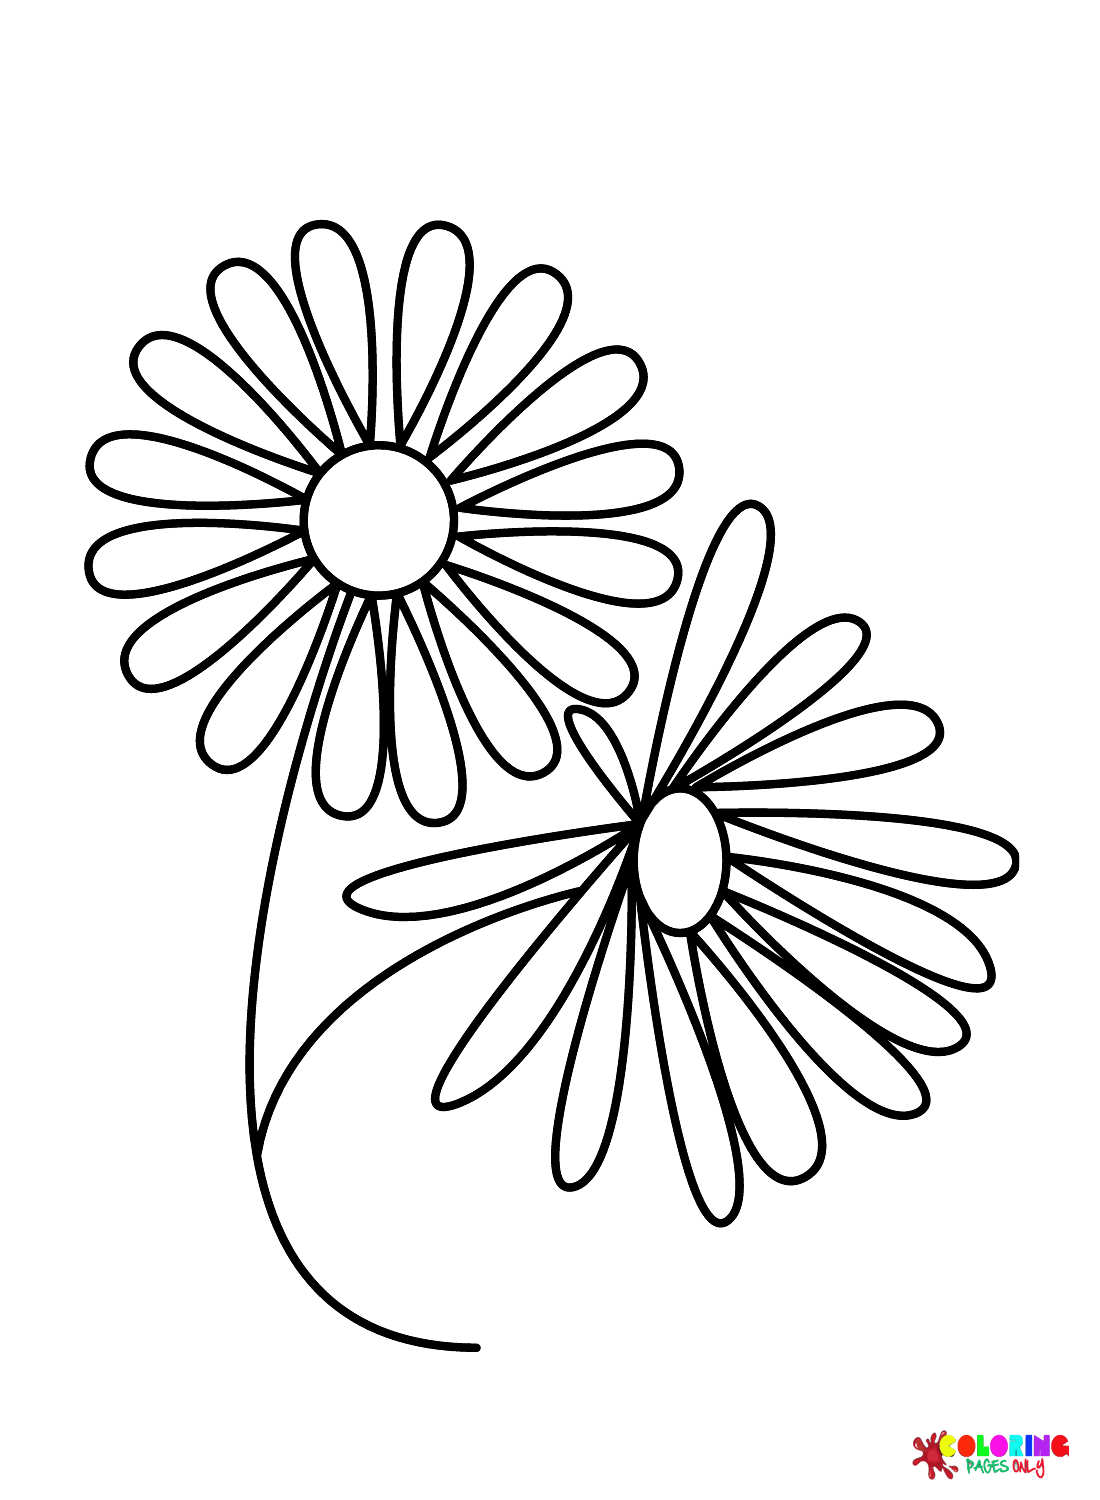 Draw Easy Daisy Flower Coloring Page